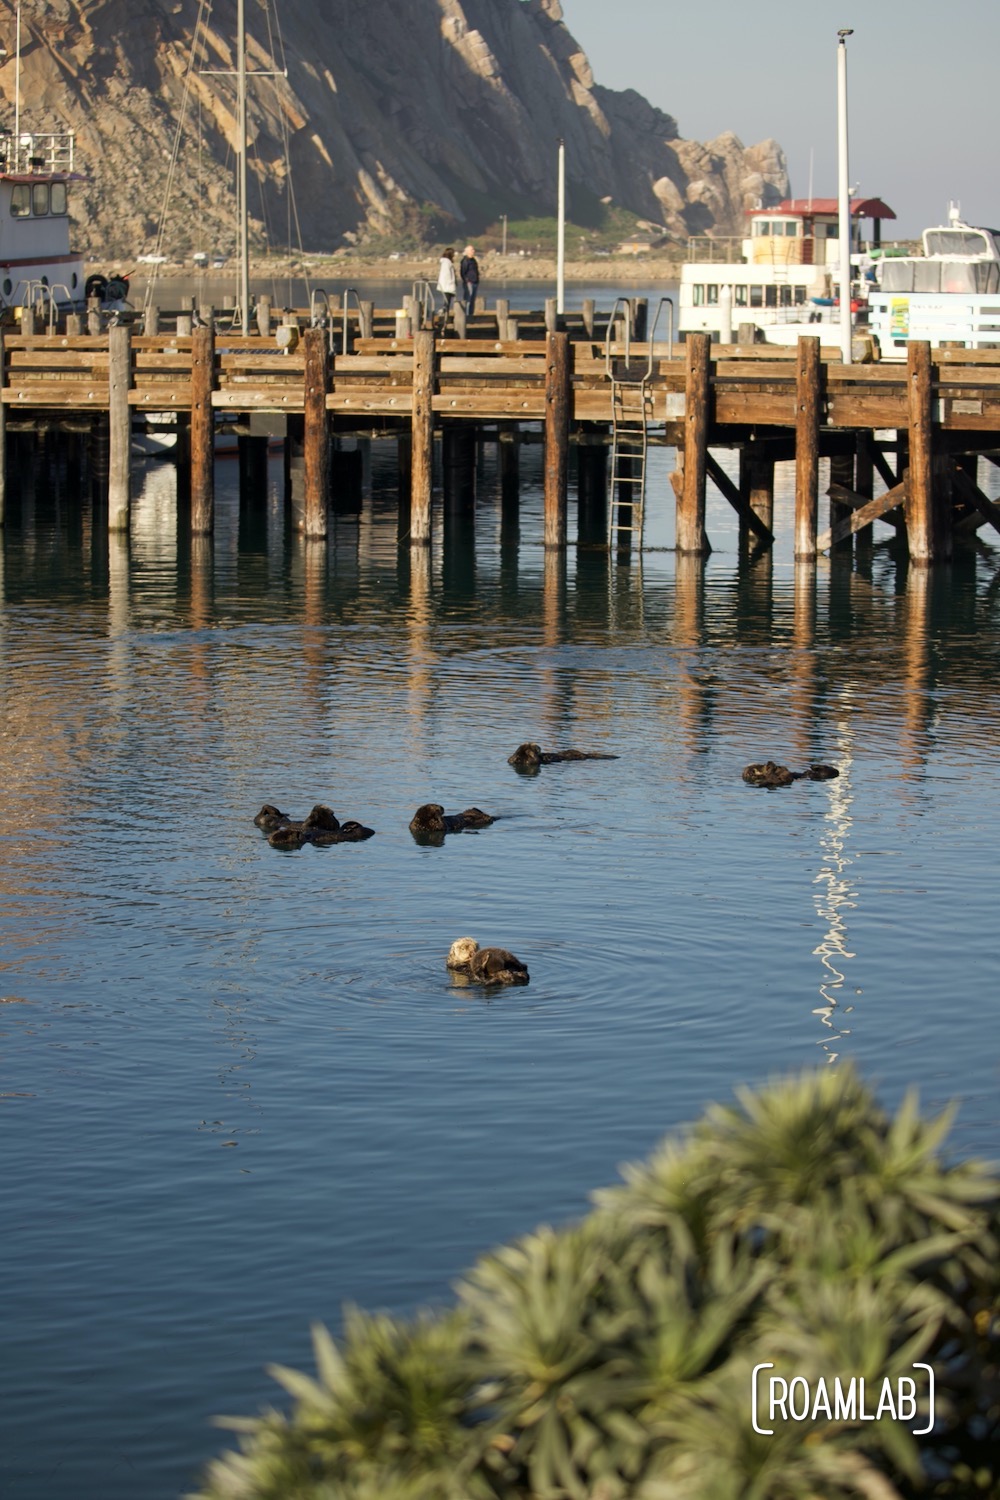 A raft of sea otters in Morro Bay, California with Morro Rock in the background.